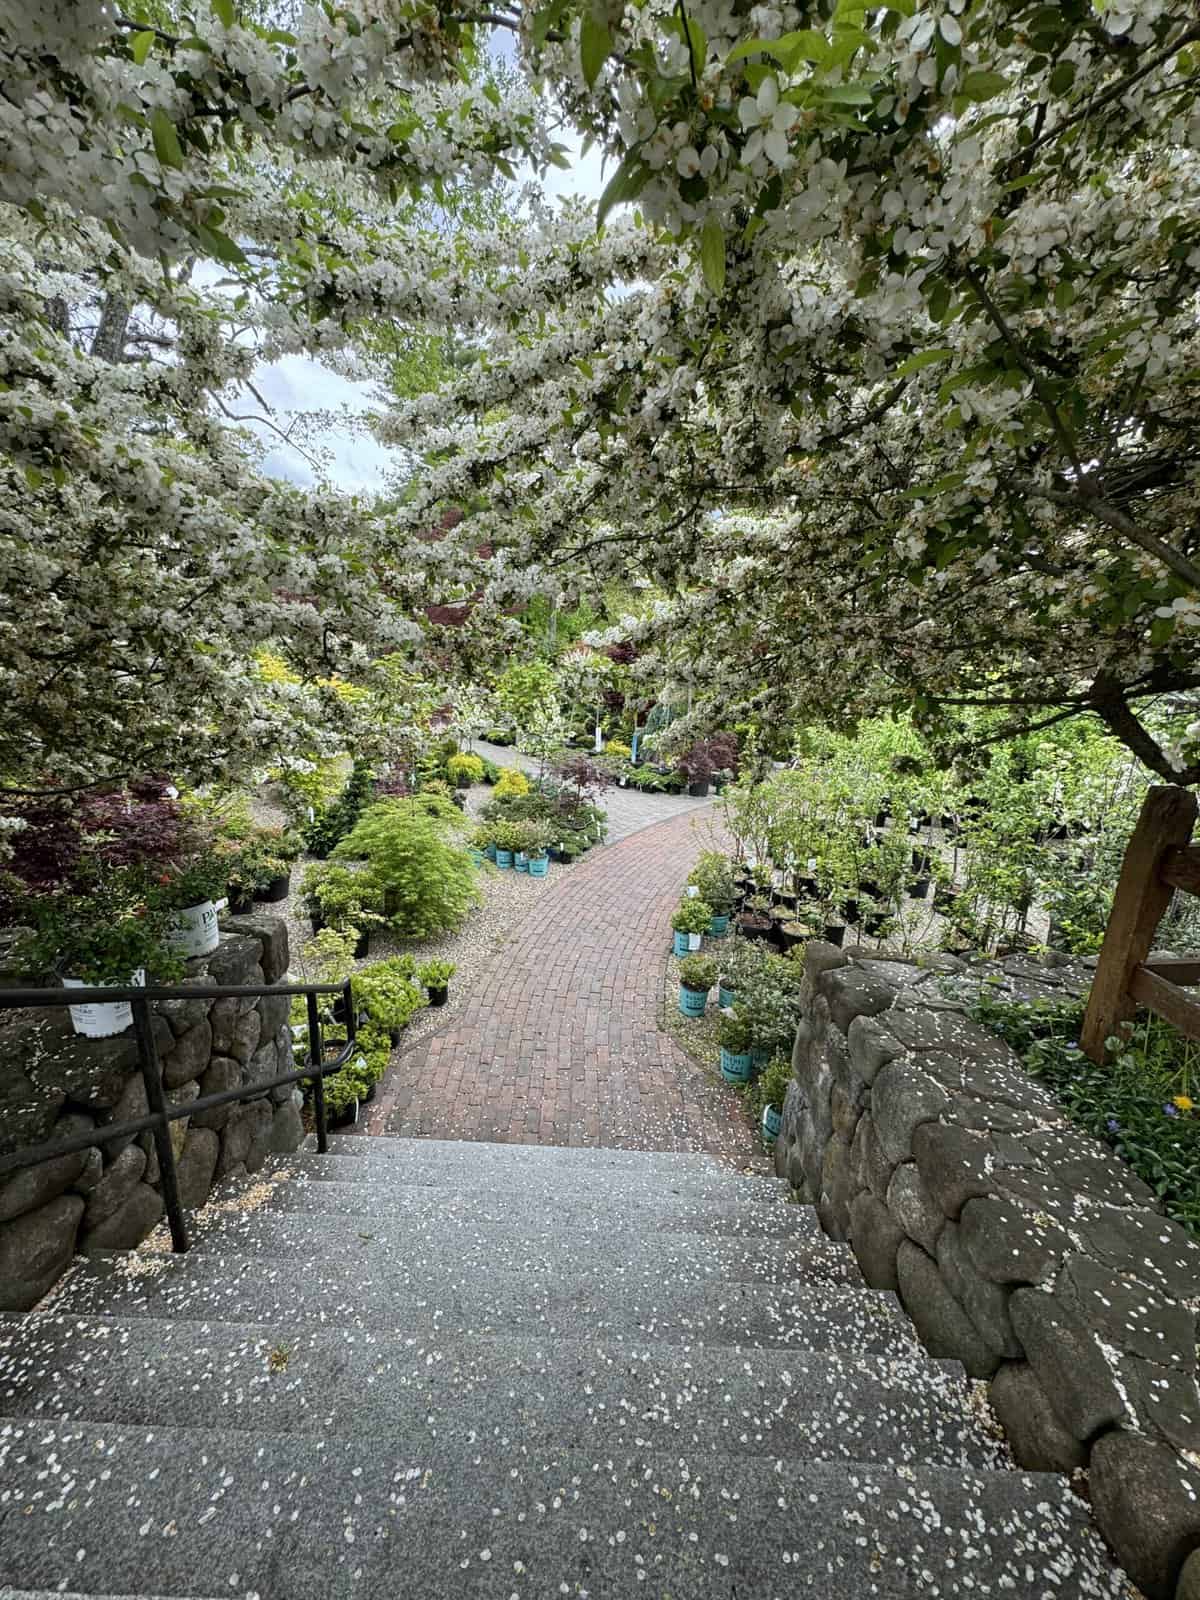 A stone staircase bordered by a stone wall leads down to a brick path lined with blooming trees and potted plants, reminiscent of the Boston Garden Center, creating a serene, lush garden scene. Flower petals are scattered along the stairs, adding to the peaceful atmosphere.